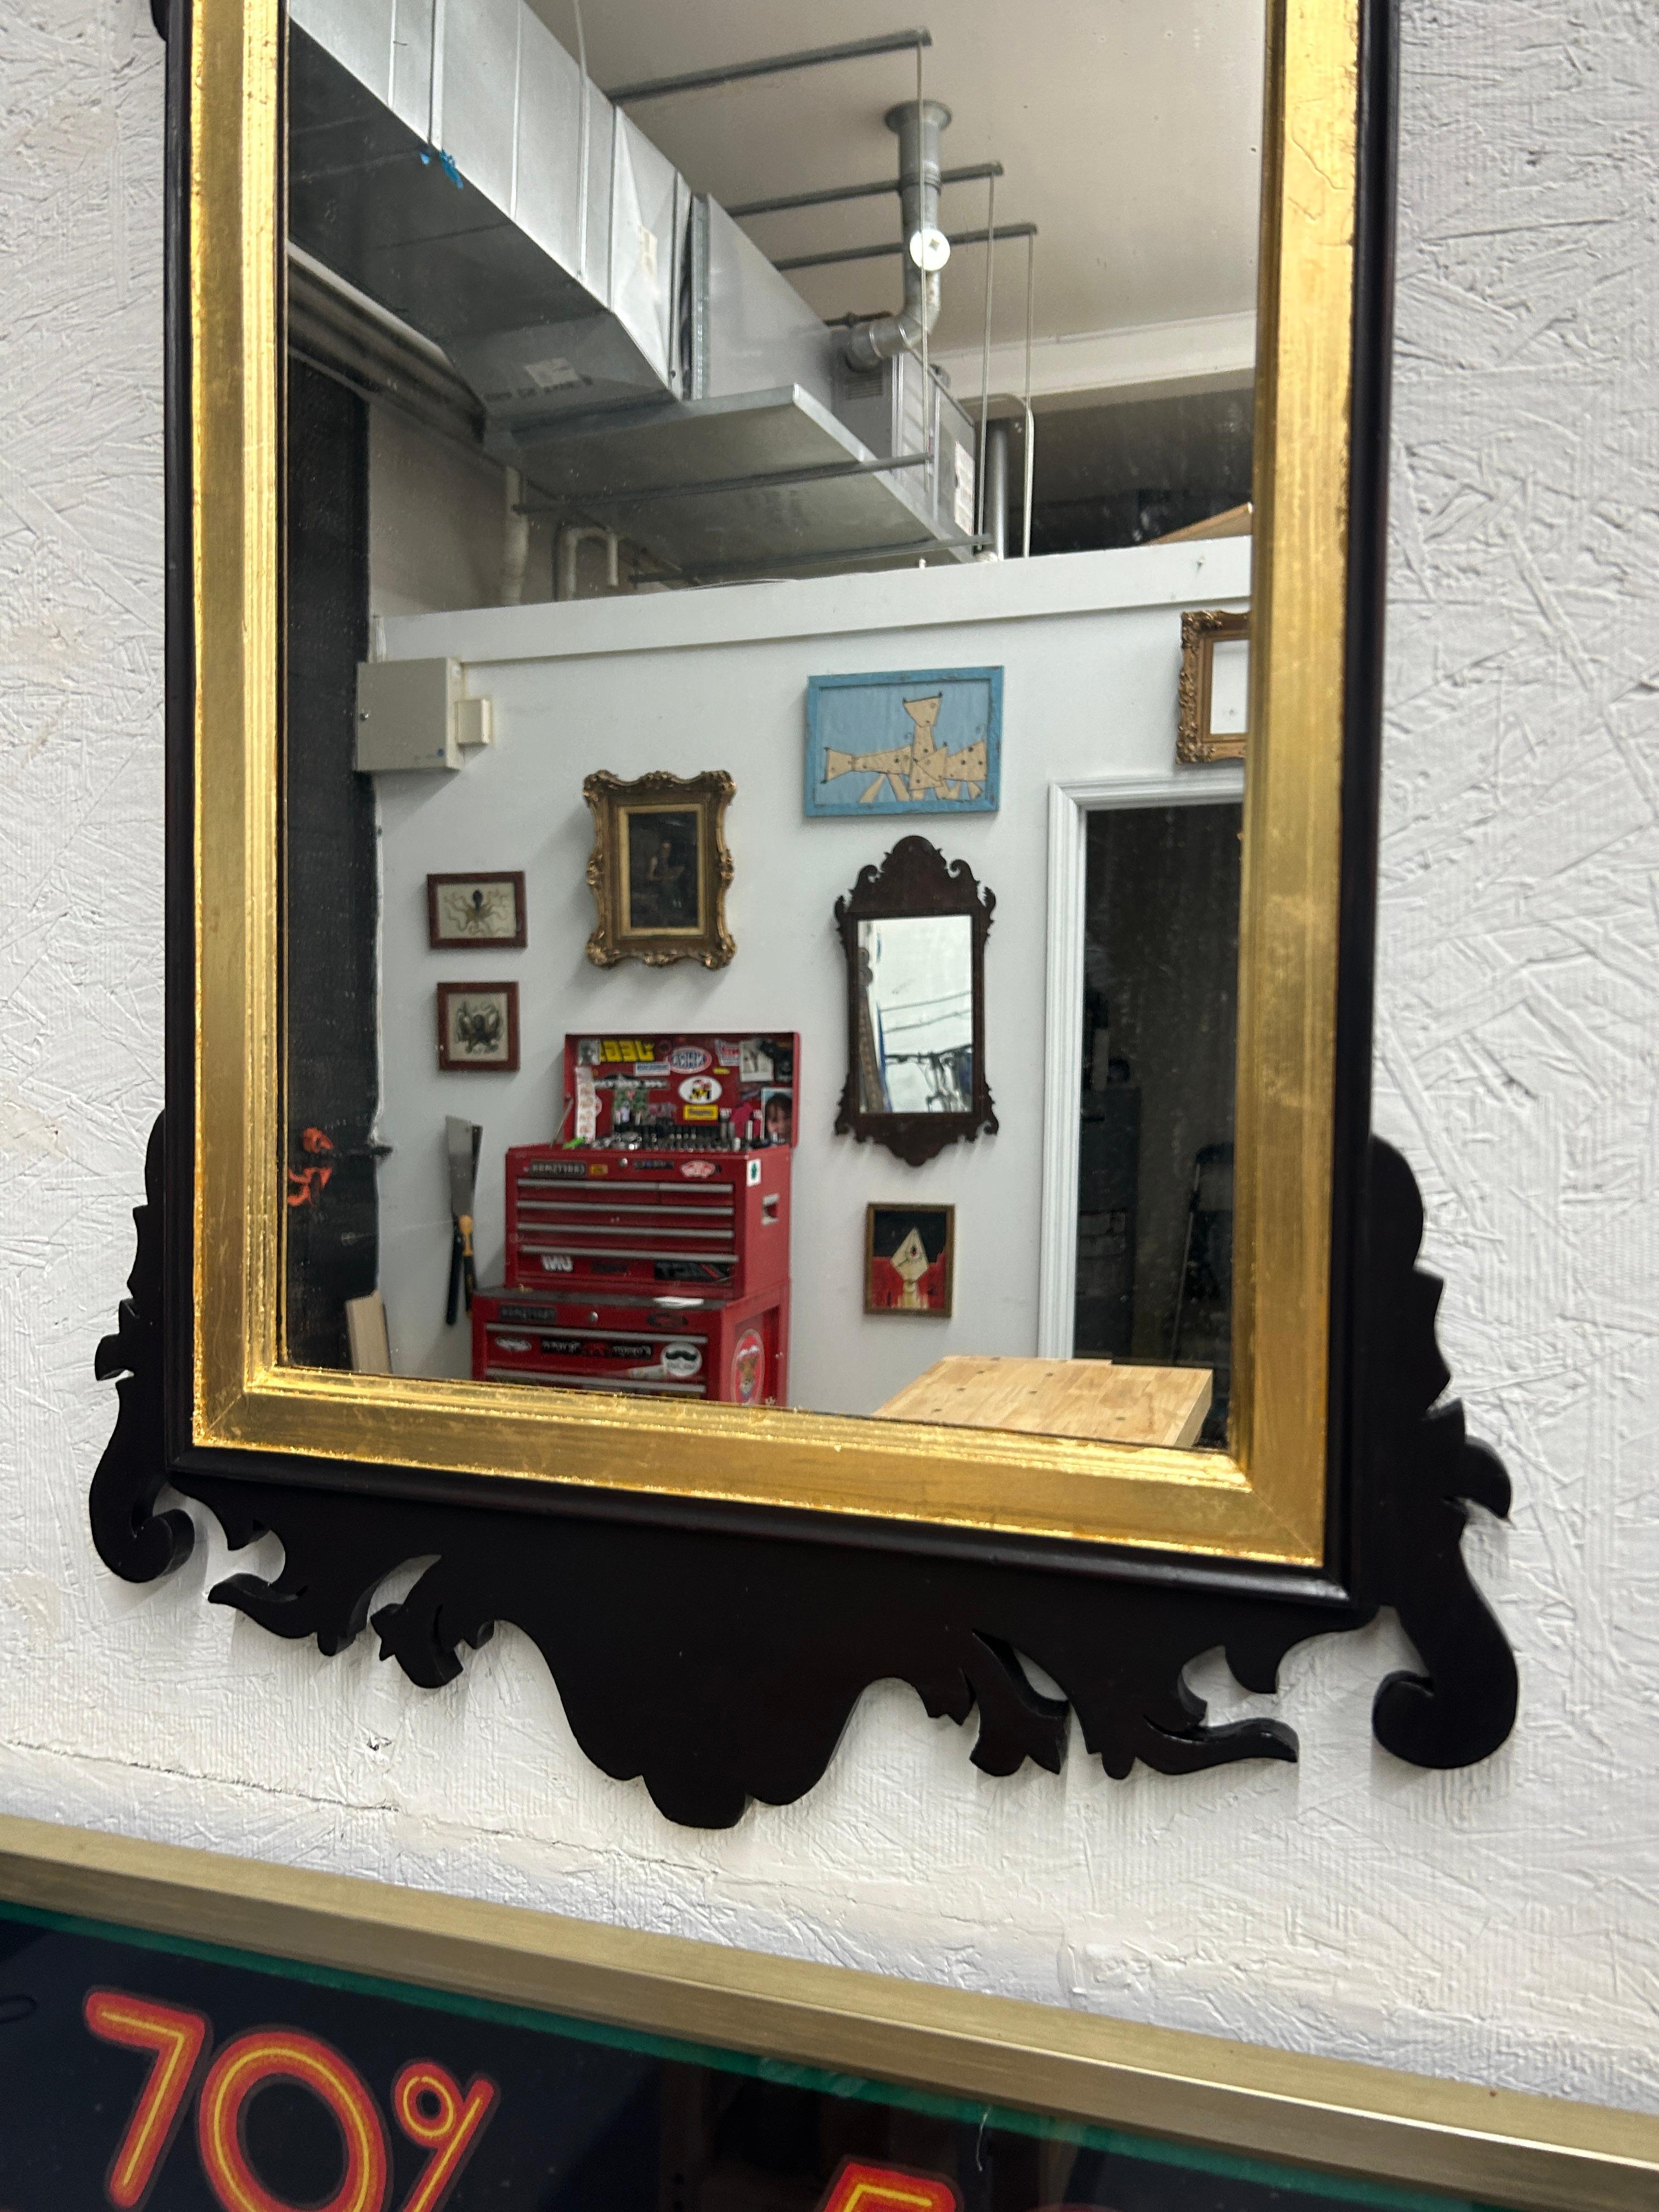 chippendale mirrors